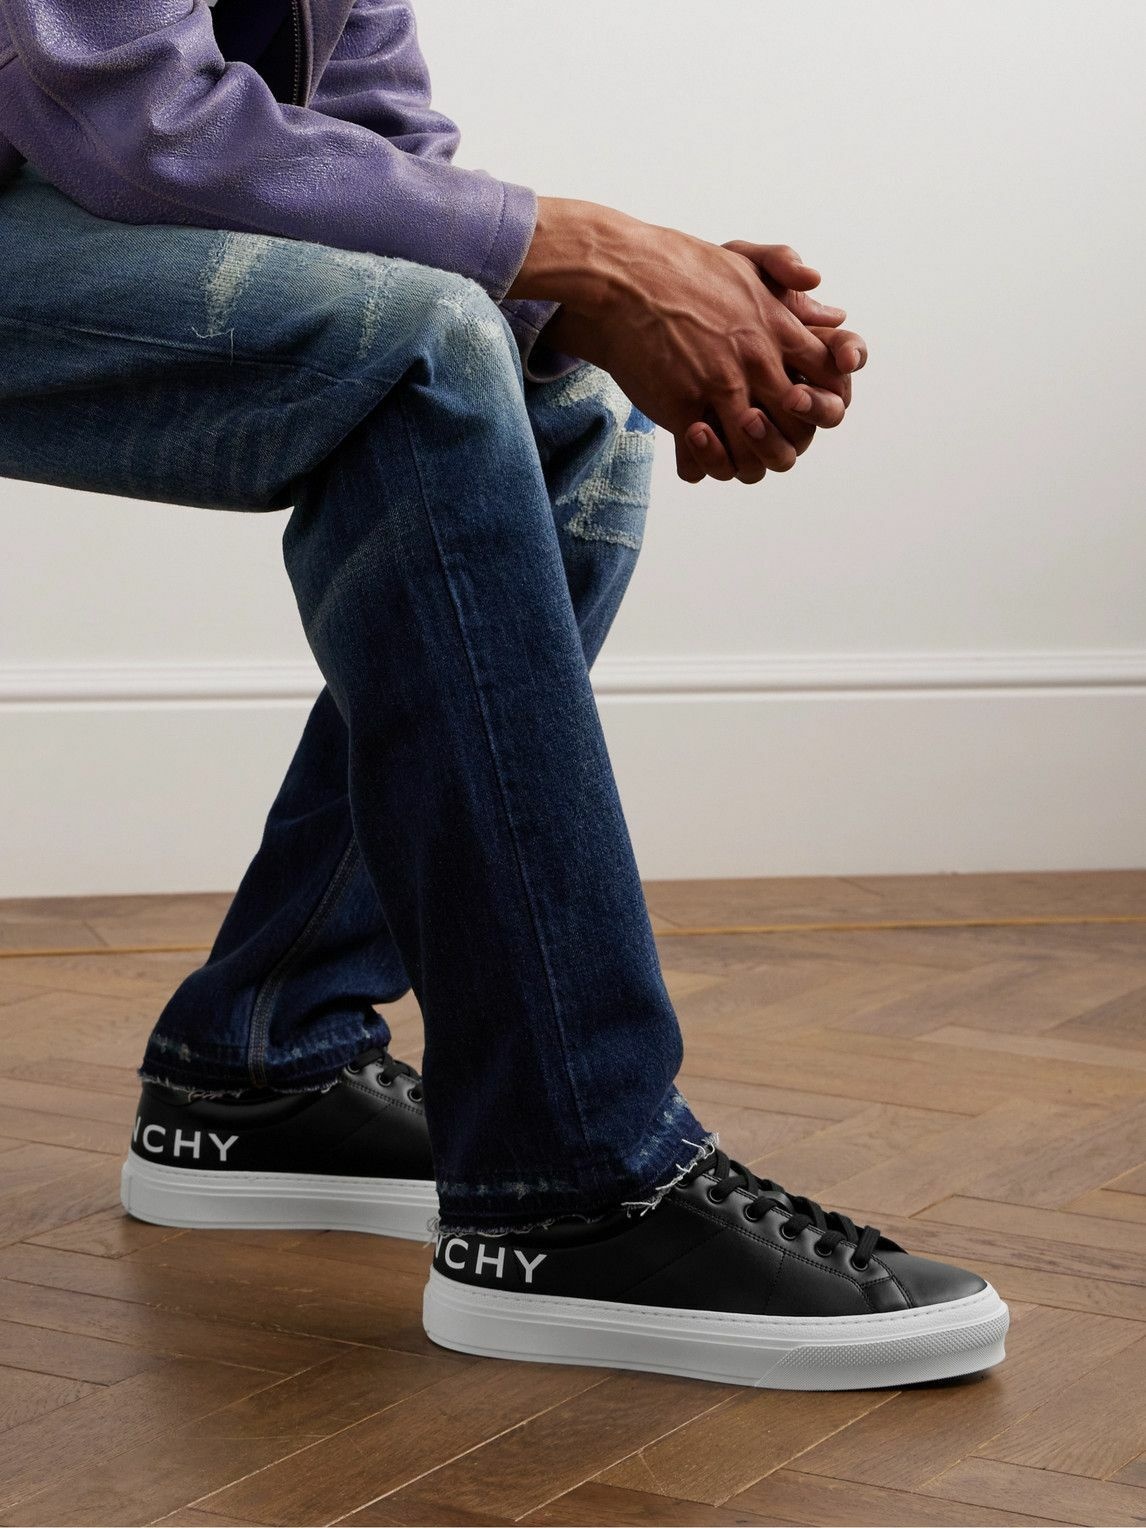 Givenchy - City Sport Leather Sneakers - Black Givenchy